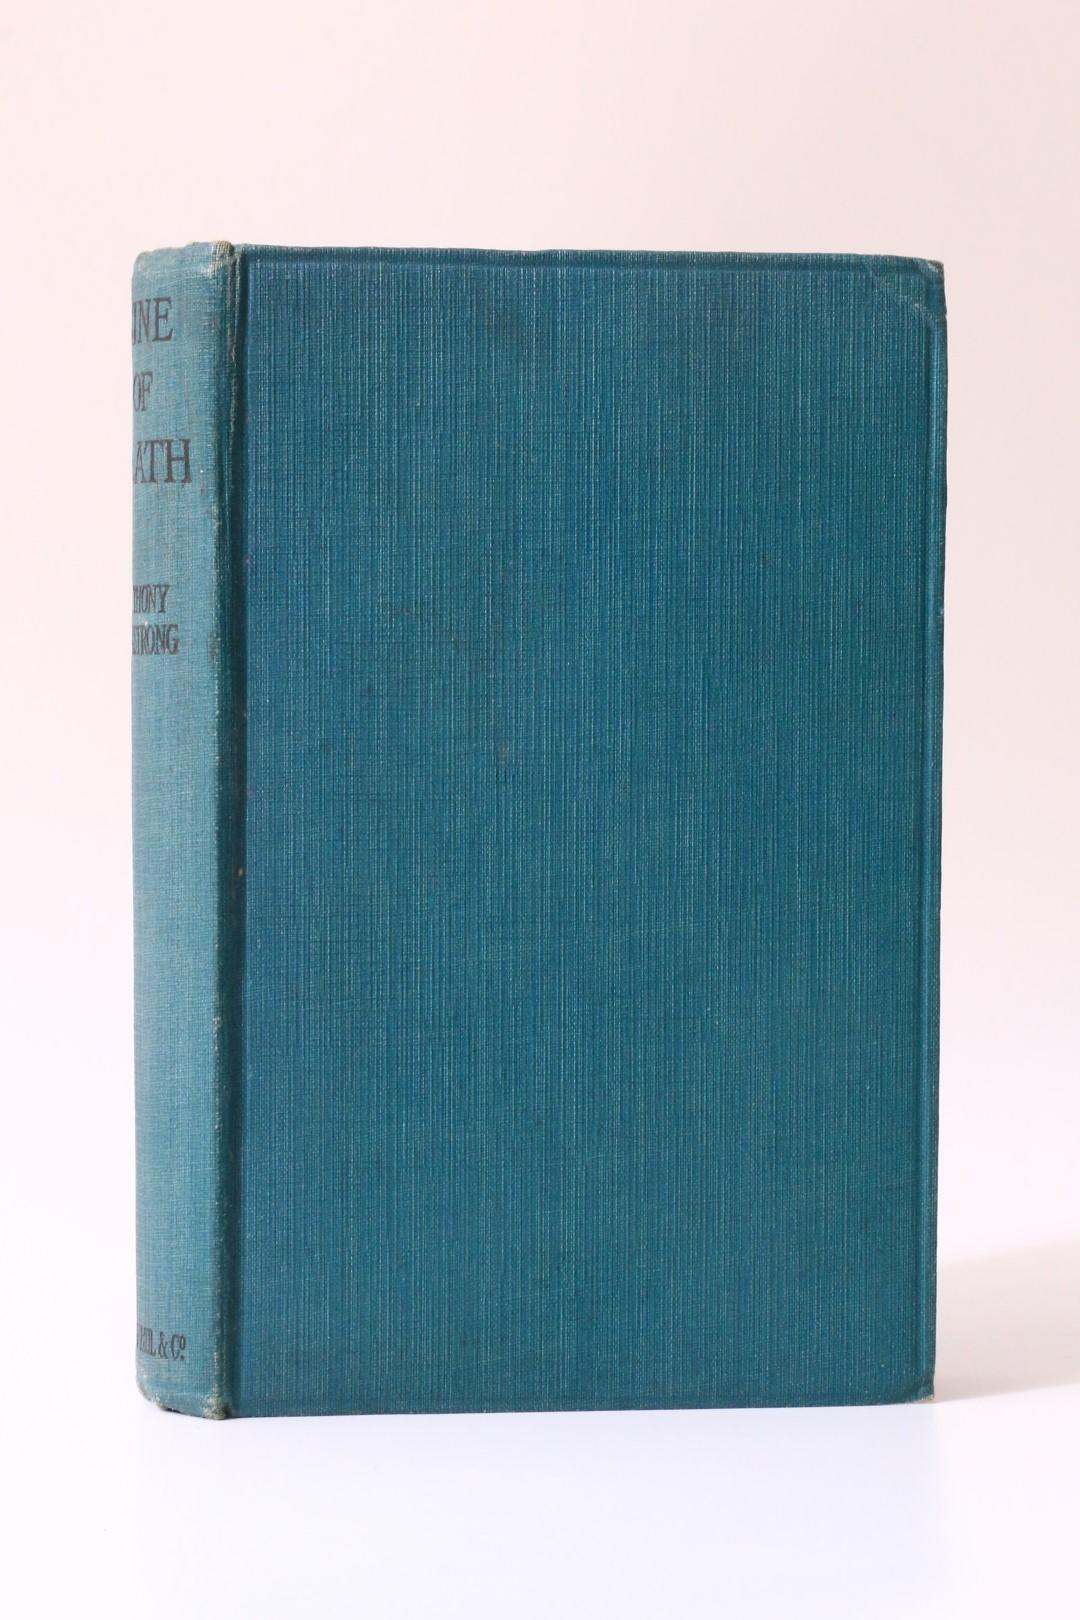 Anthony Armstrong - Wine of Death: A Tale of the Lost Long-Ago - Stanley Paul, n.d. [1925], First Edition.